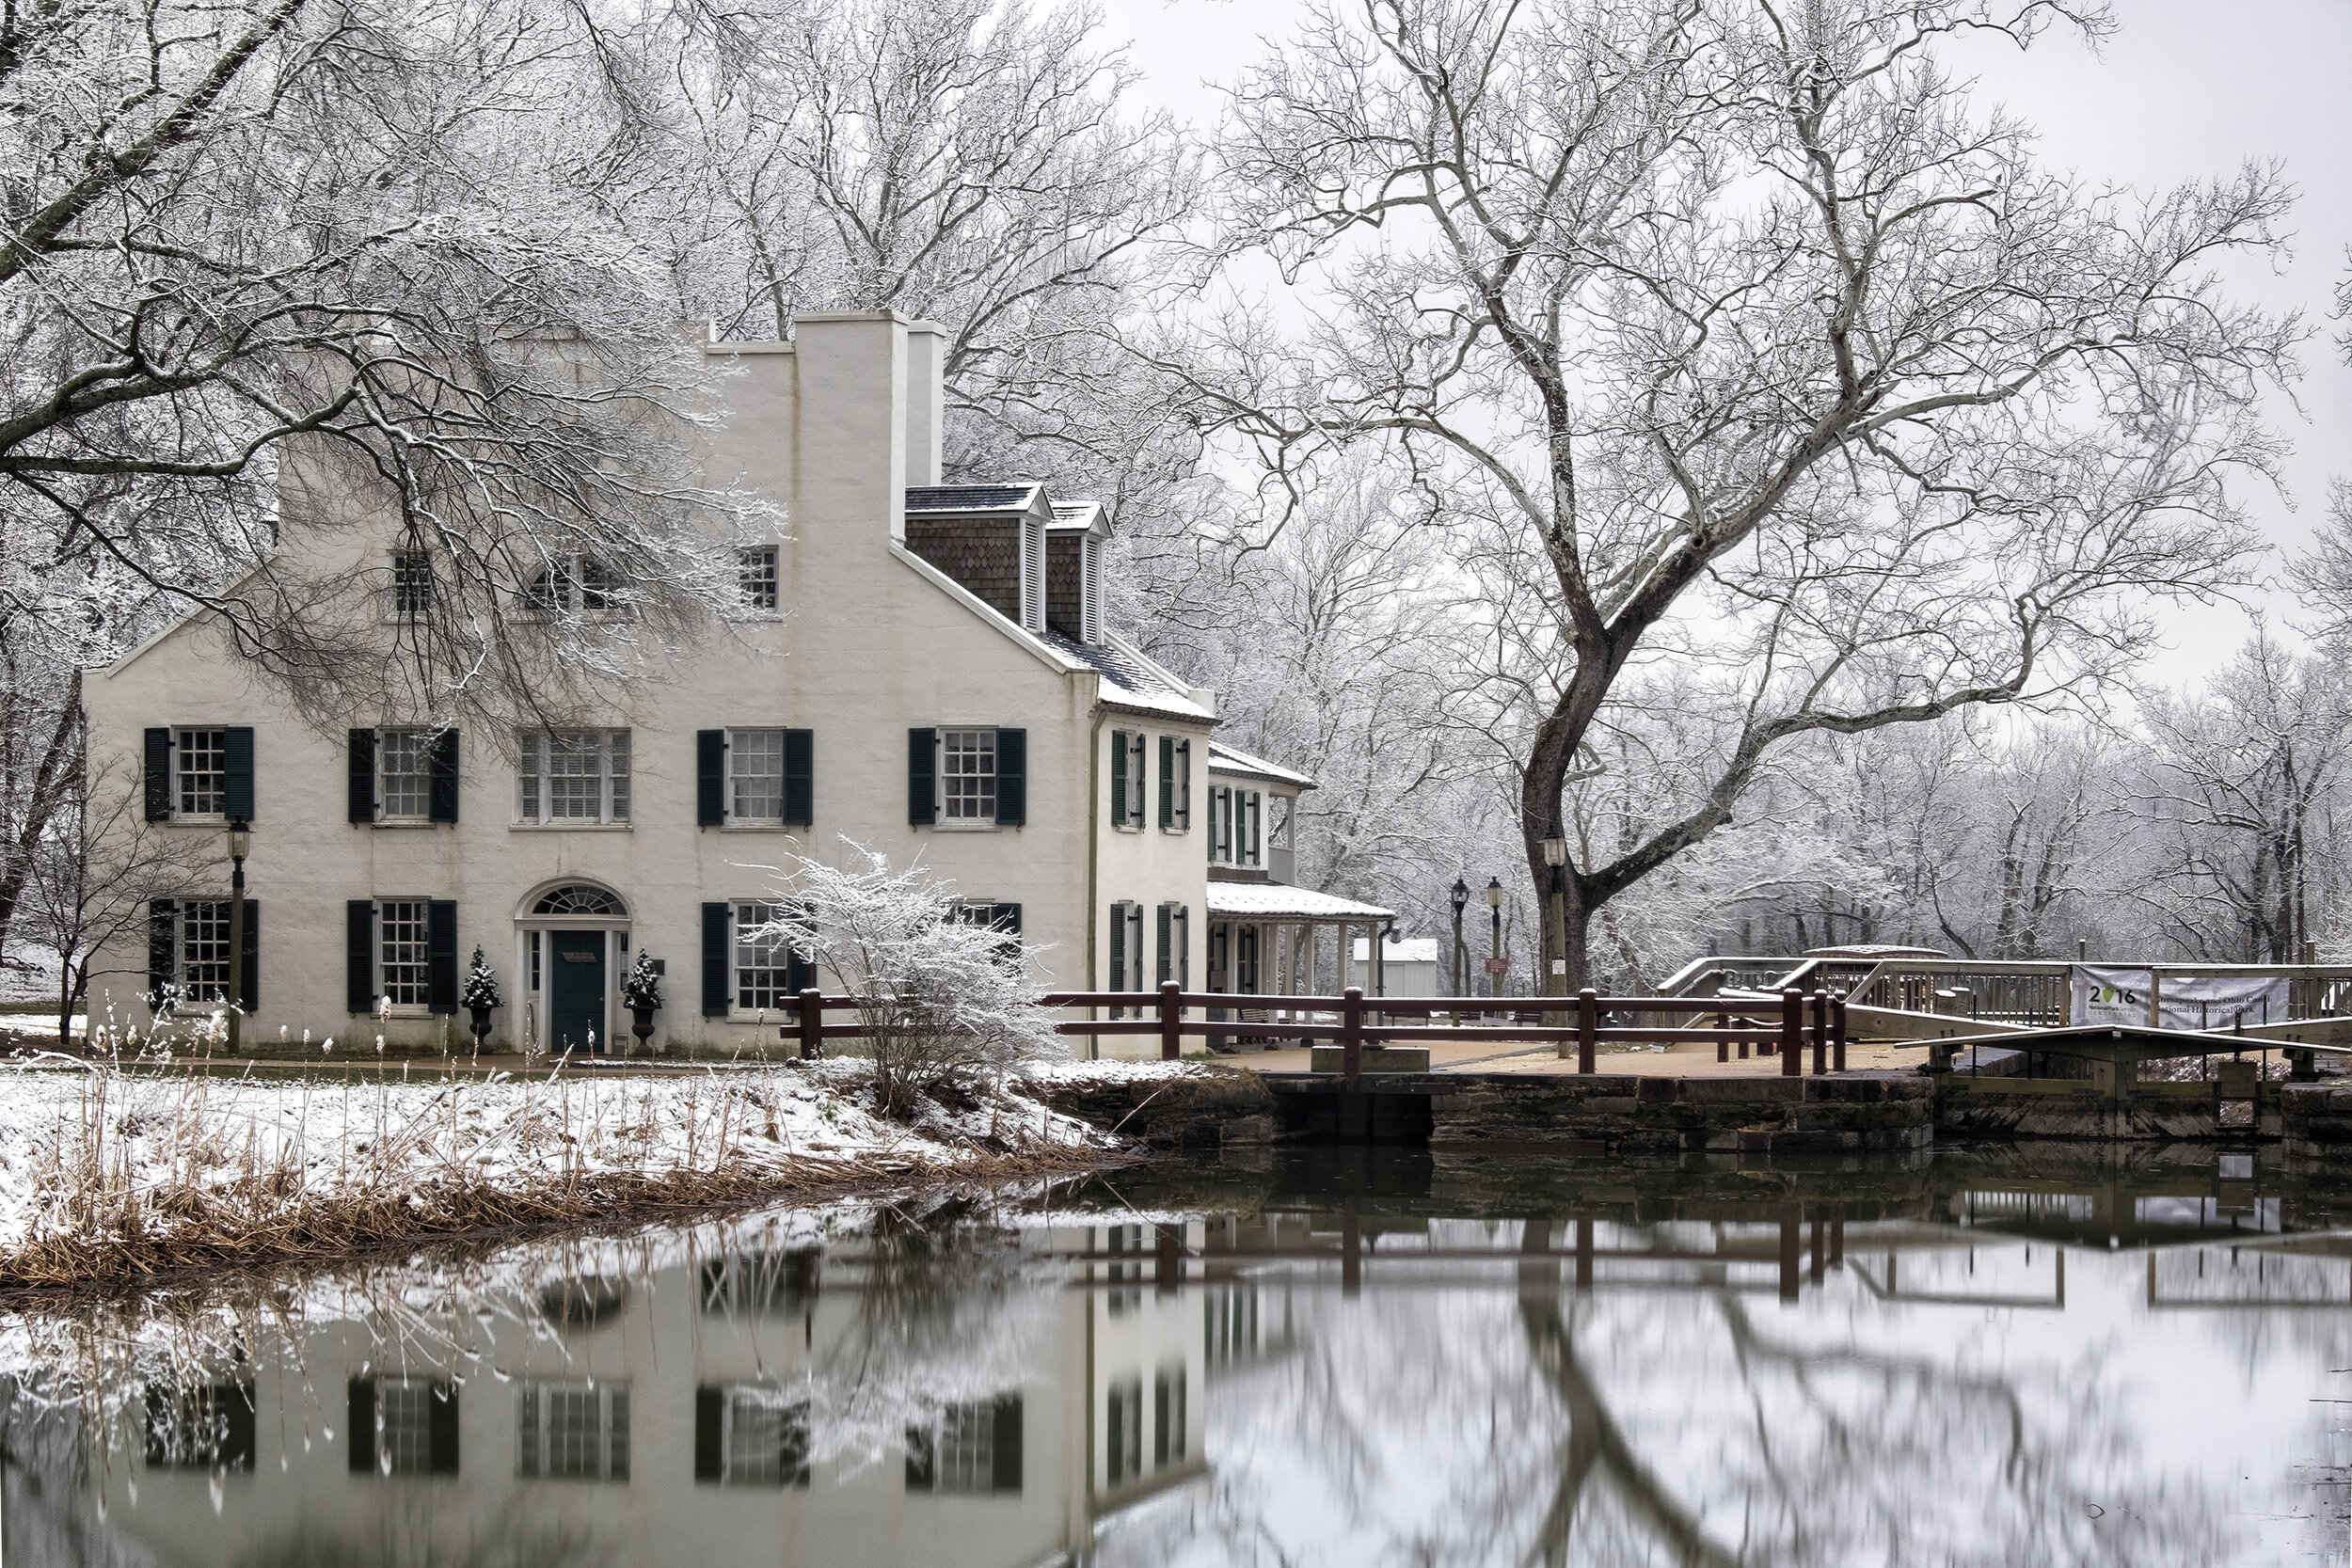 March Morning at Great Falls Tavern, C&O Canal 50th Anniversary Exhibit (Awarded Best in Show)